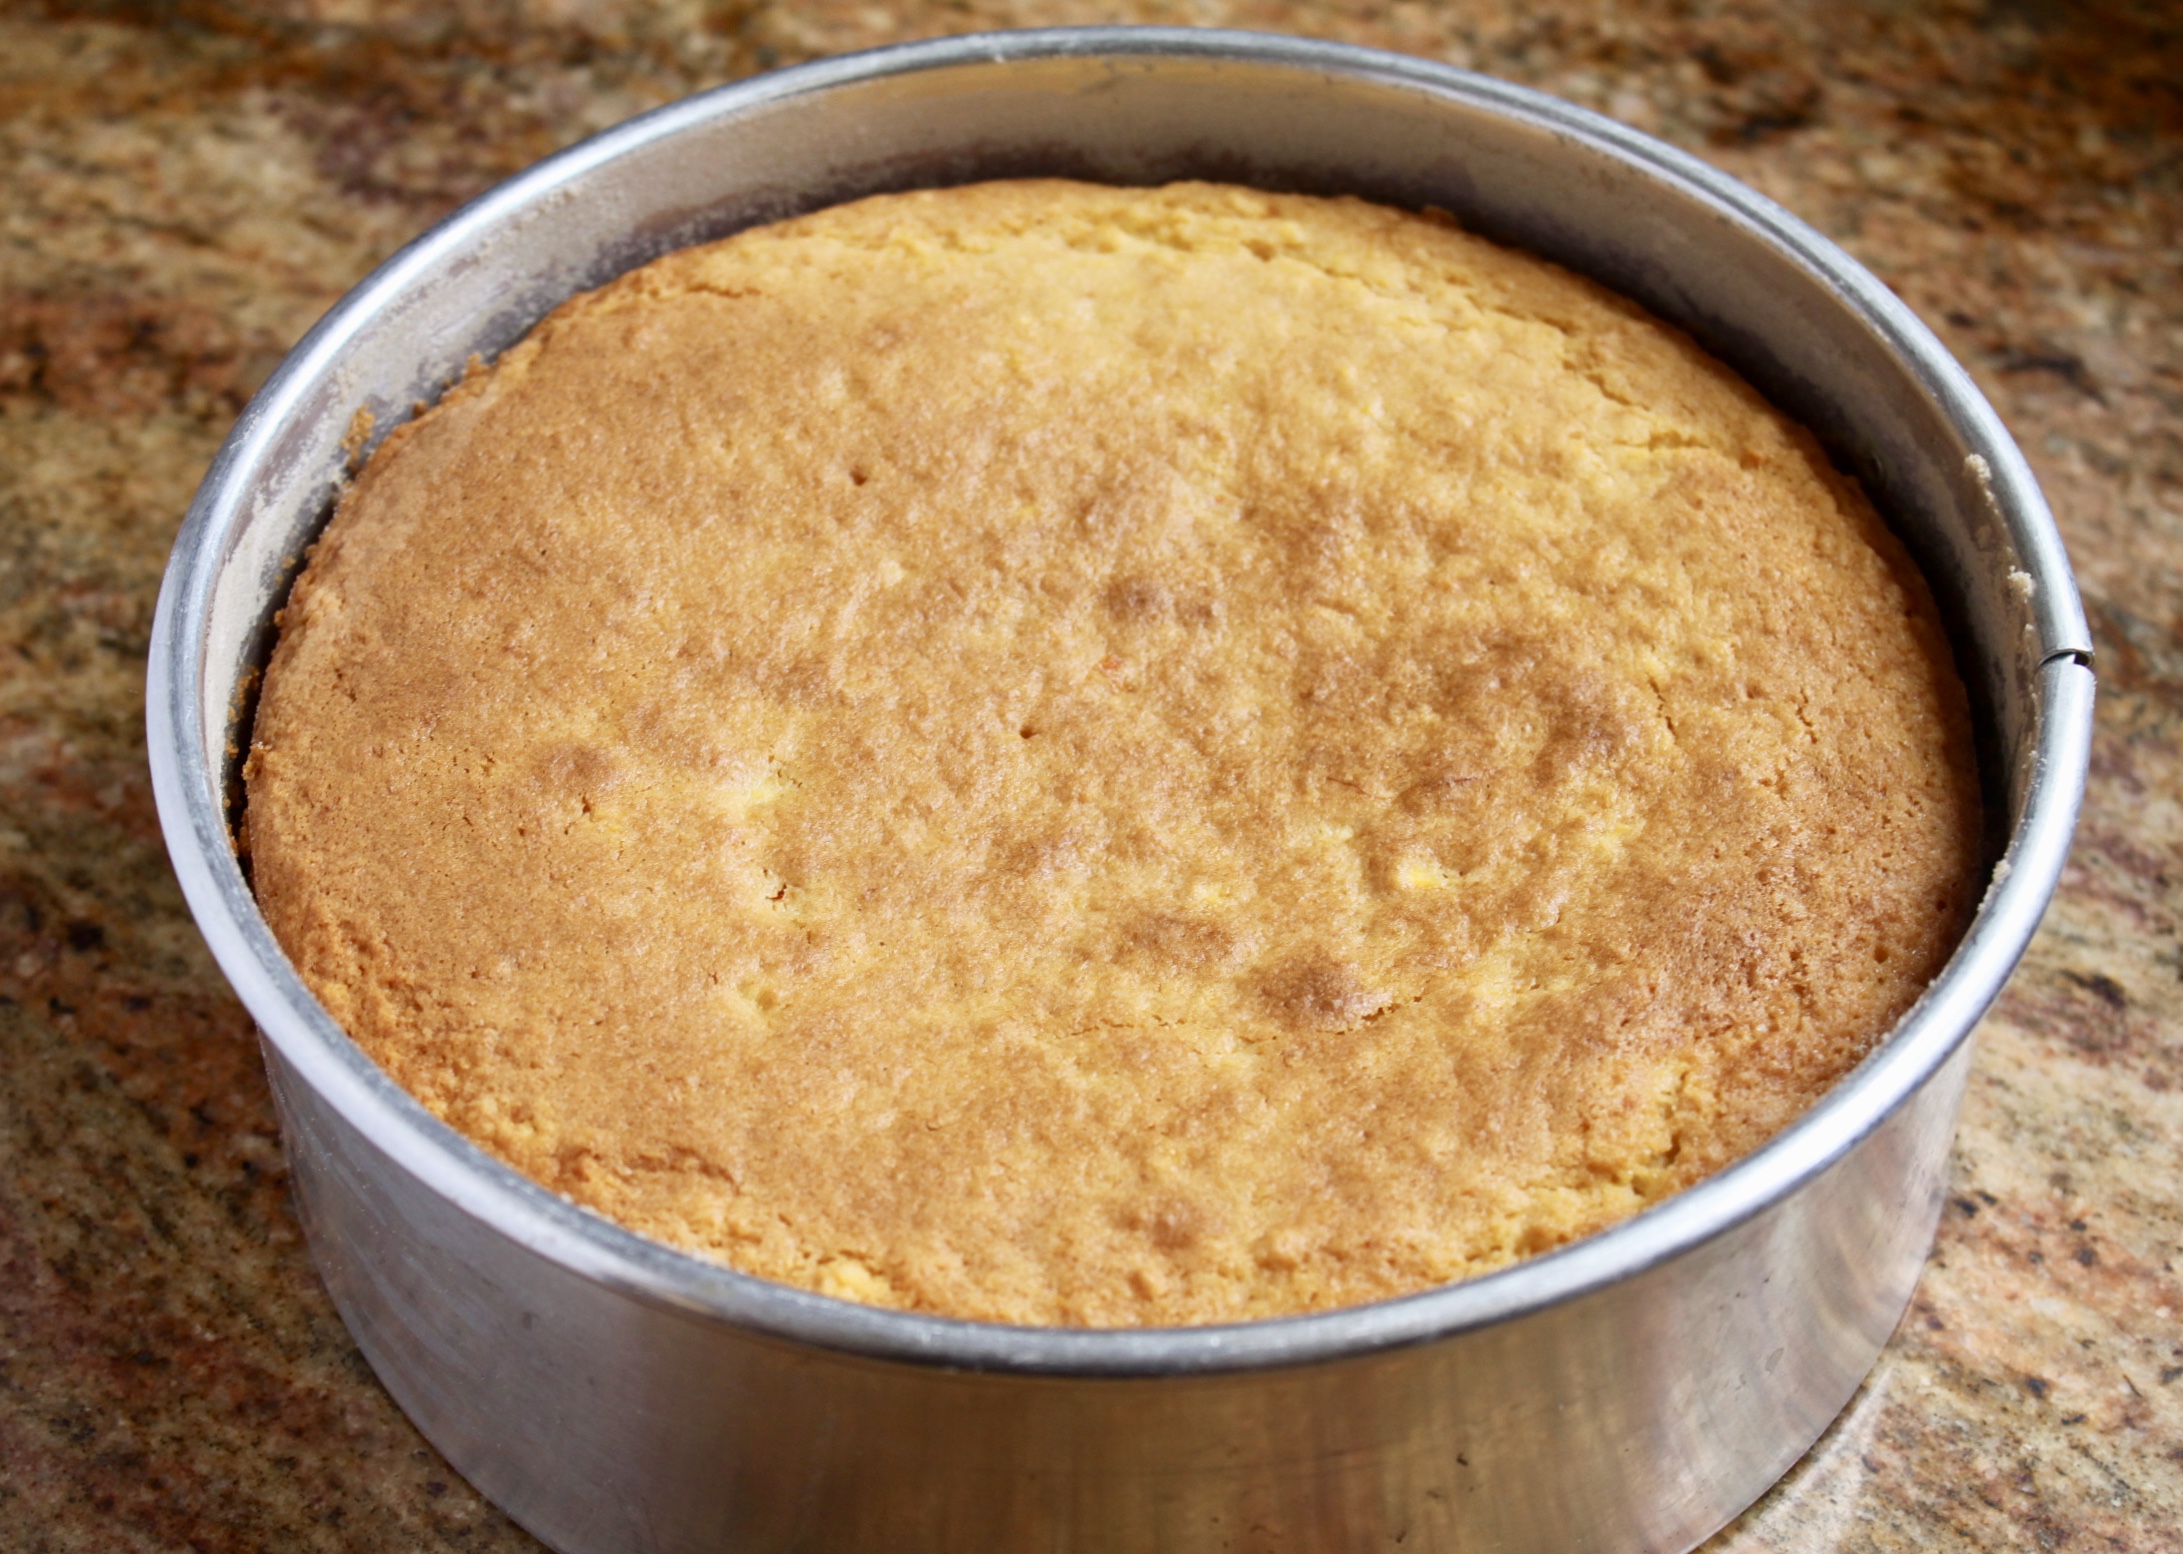 cake baked in a pan